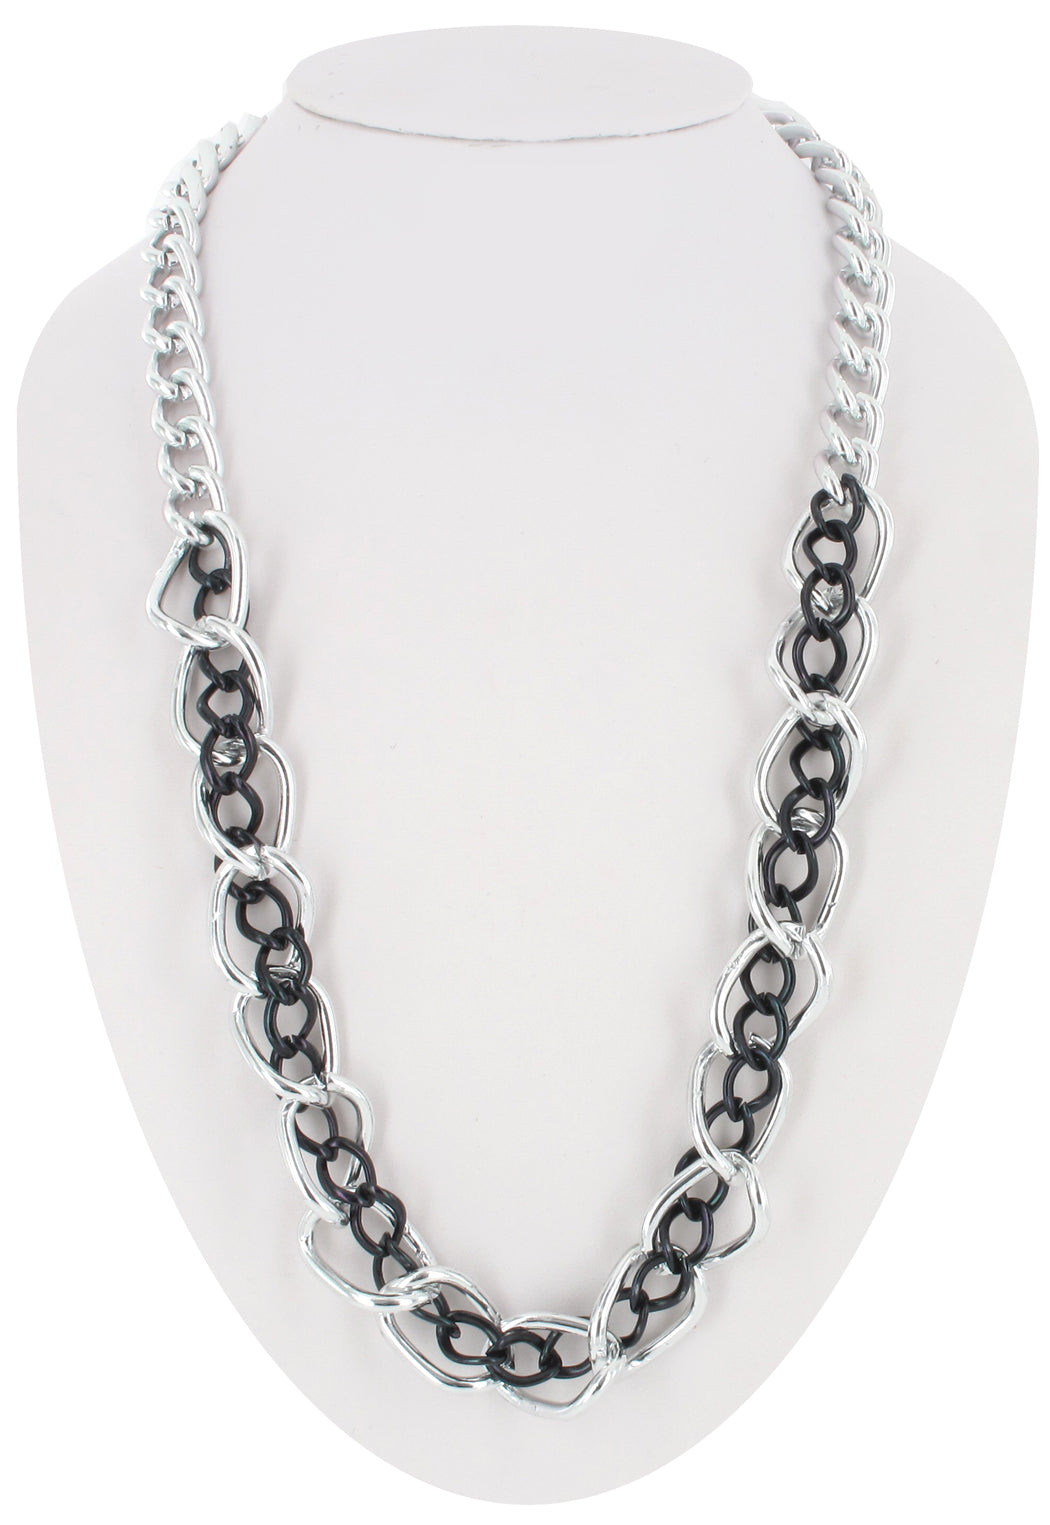 Silver Tone Black Big Chunky Chain Link Necklace 23"